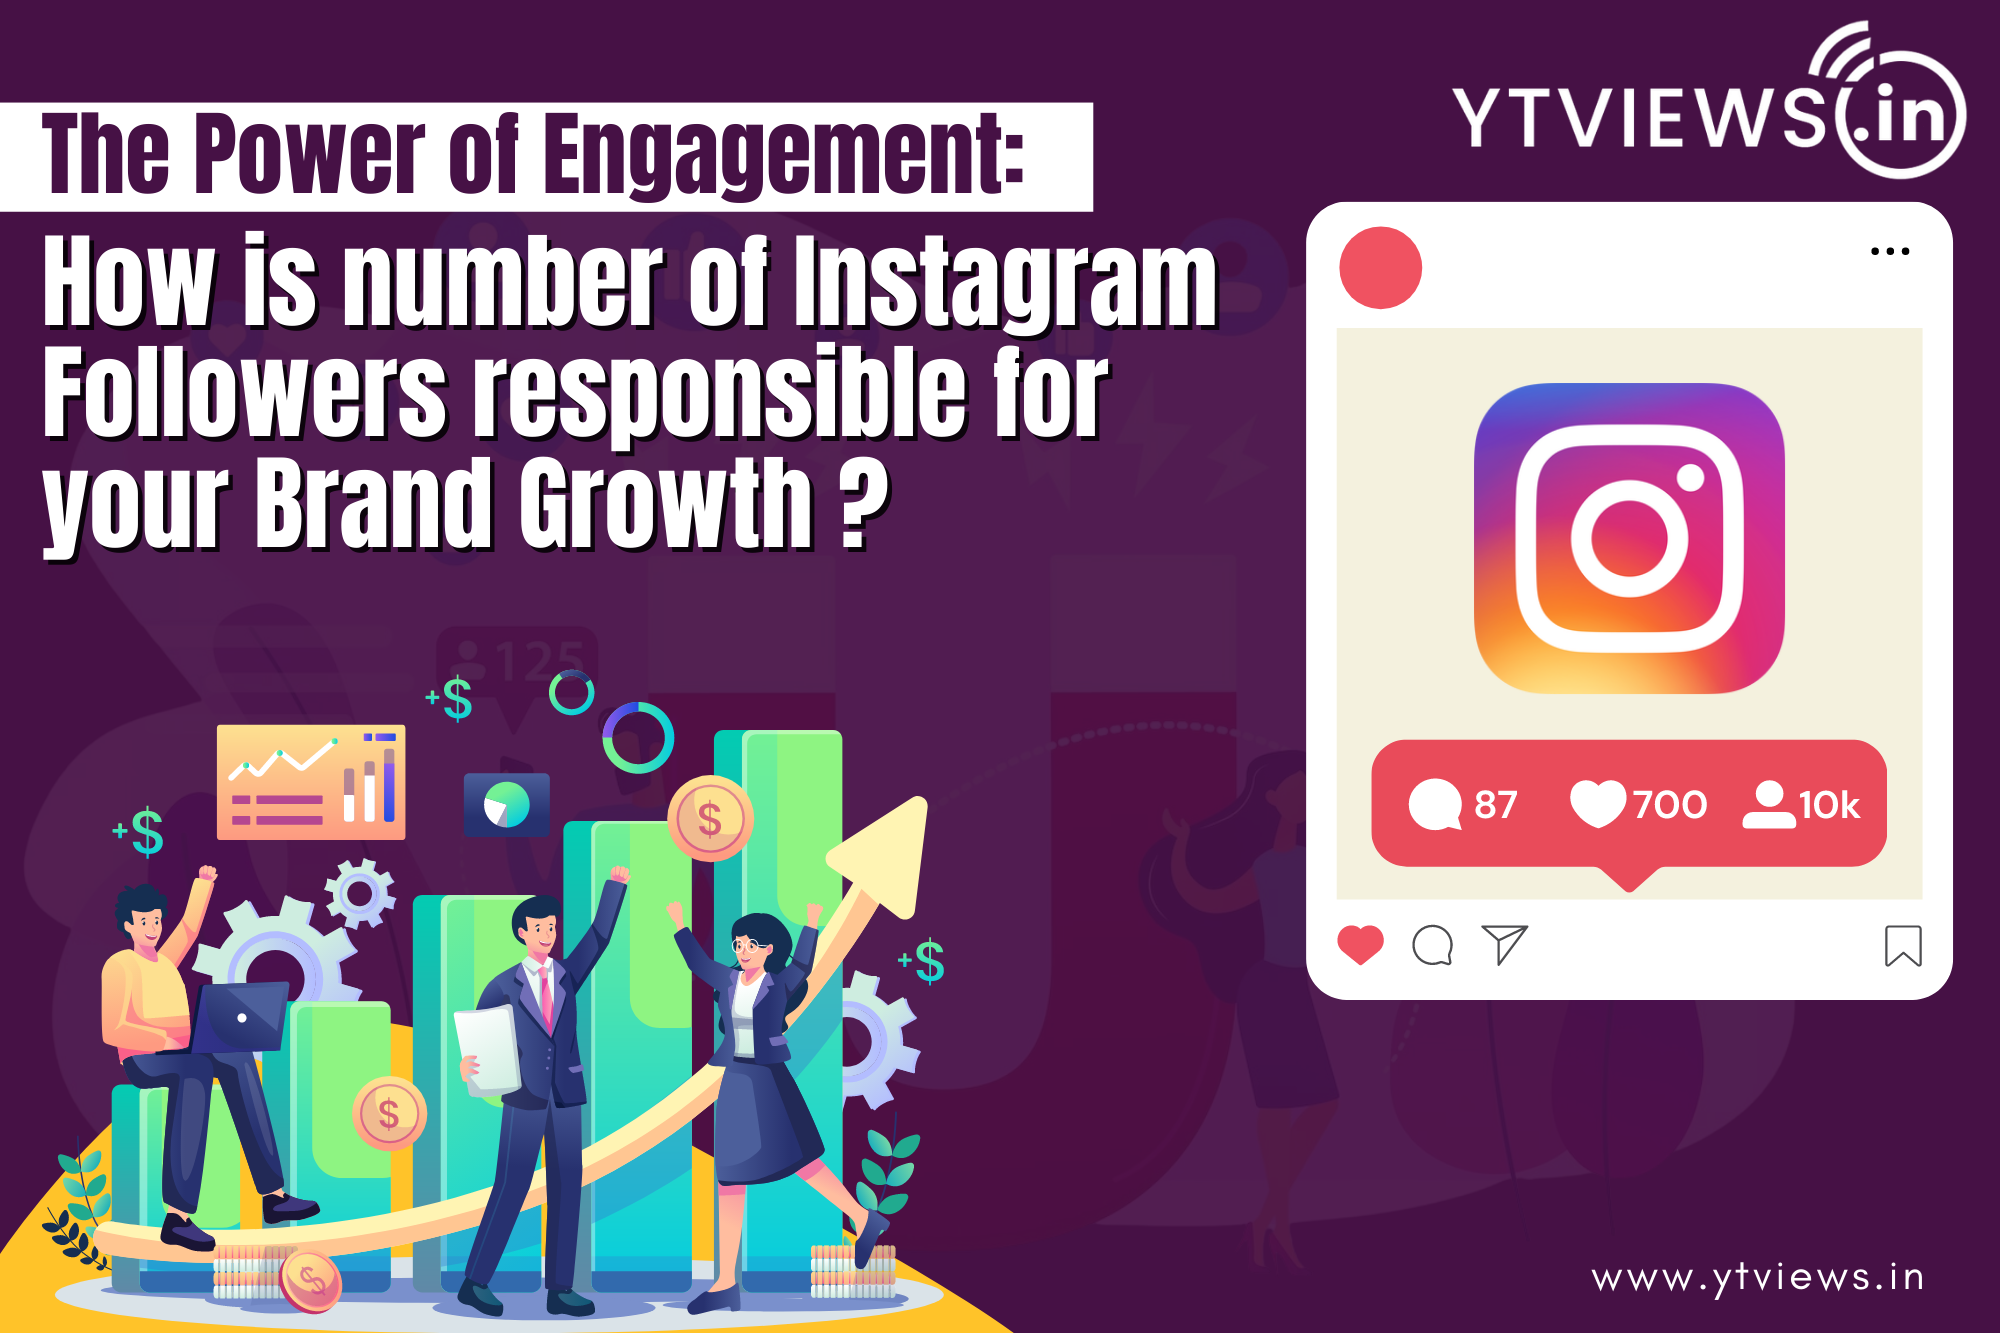 The Power of Engagement: How is the number of Instagram Followers responsible for your brand growth